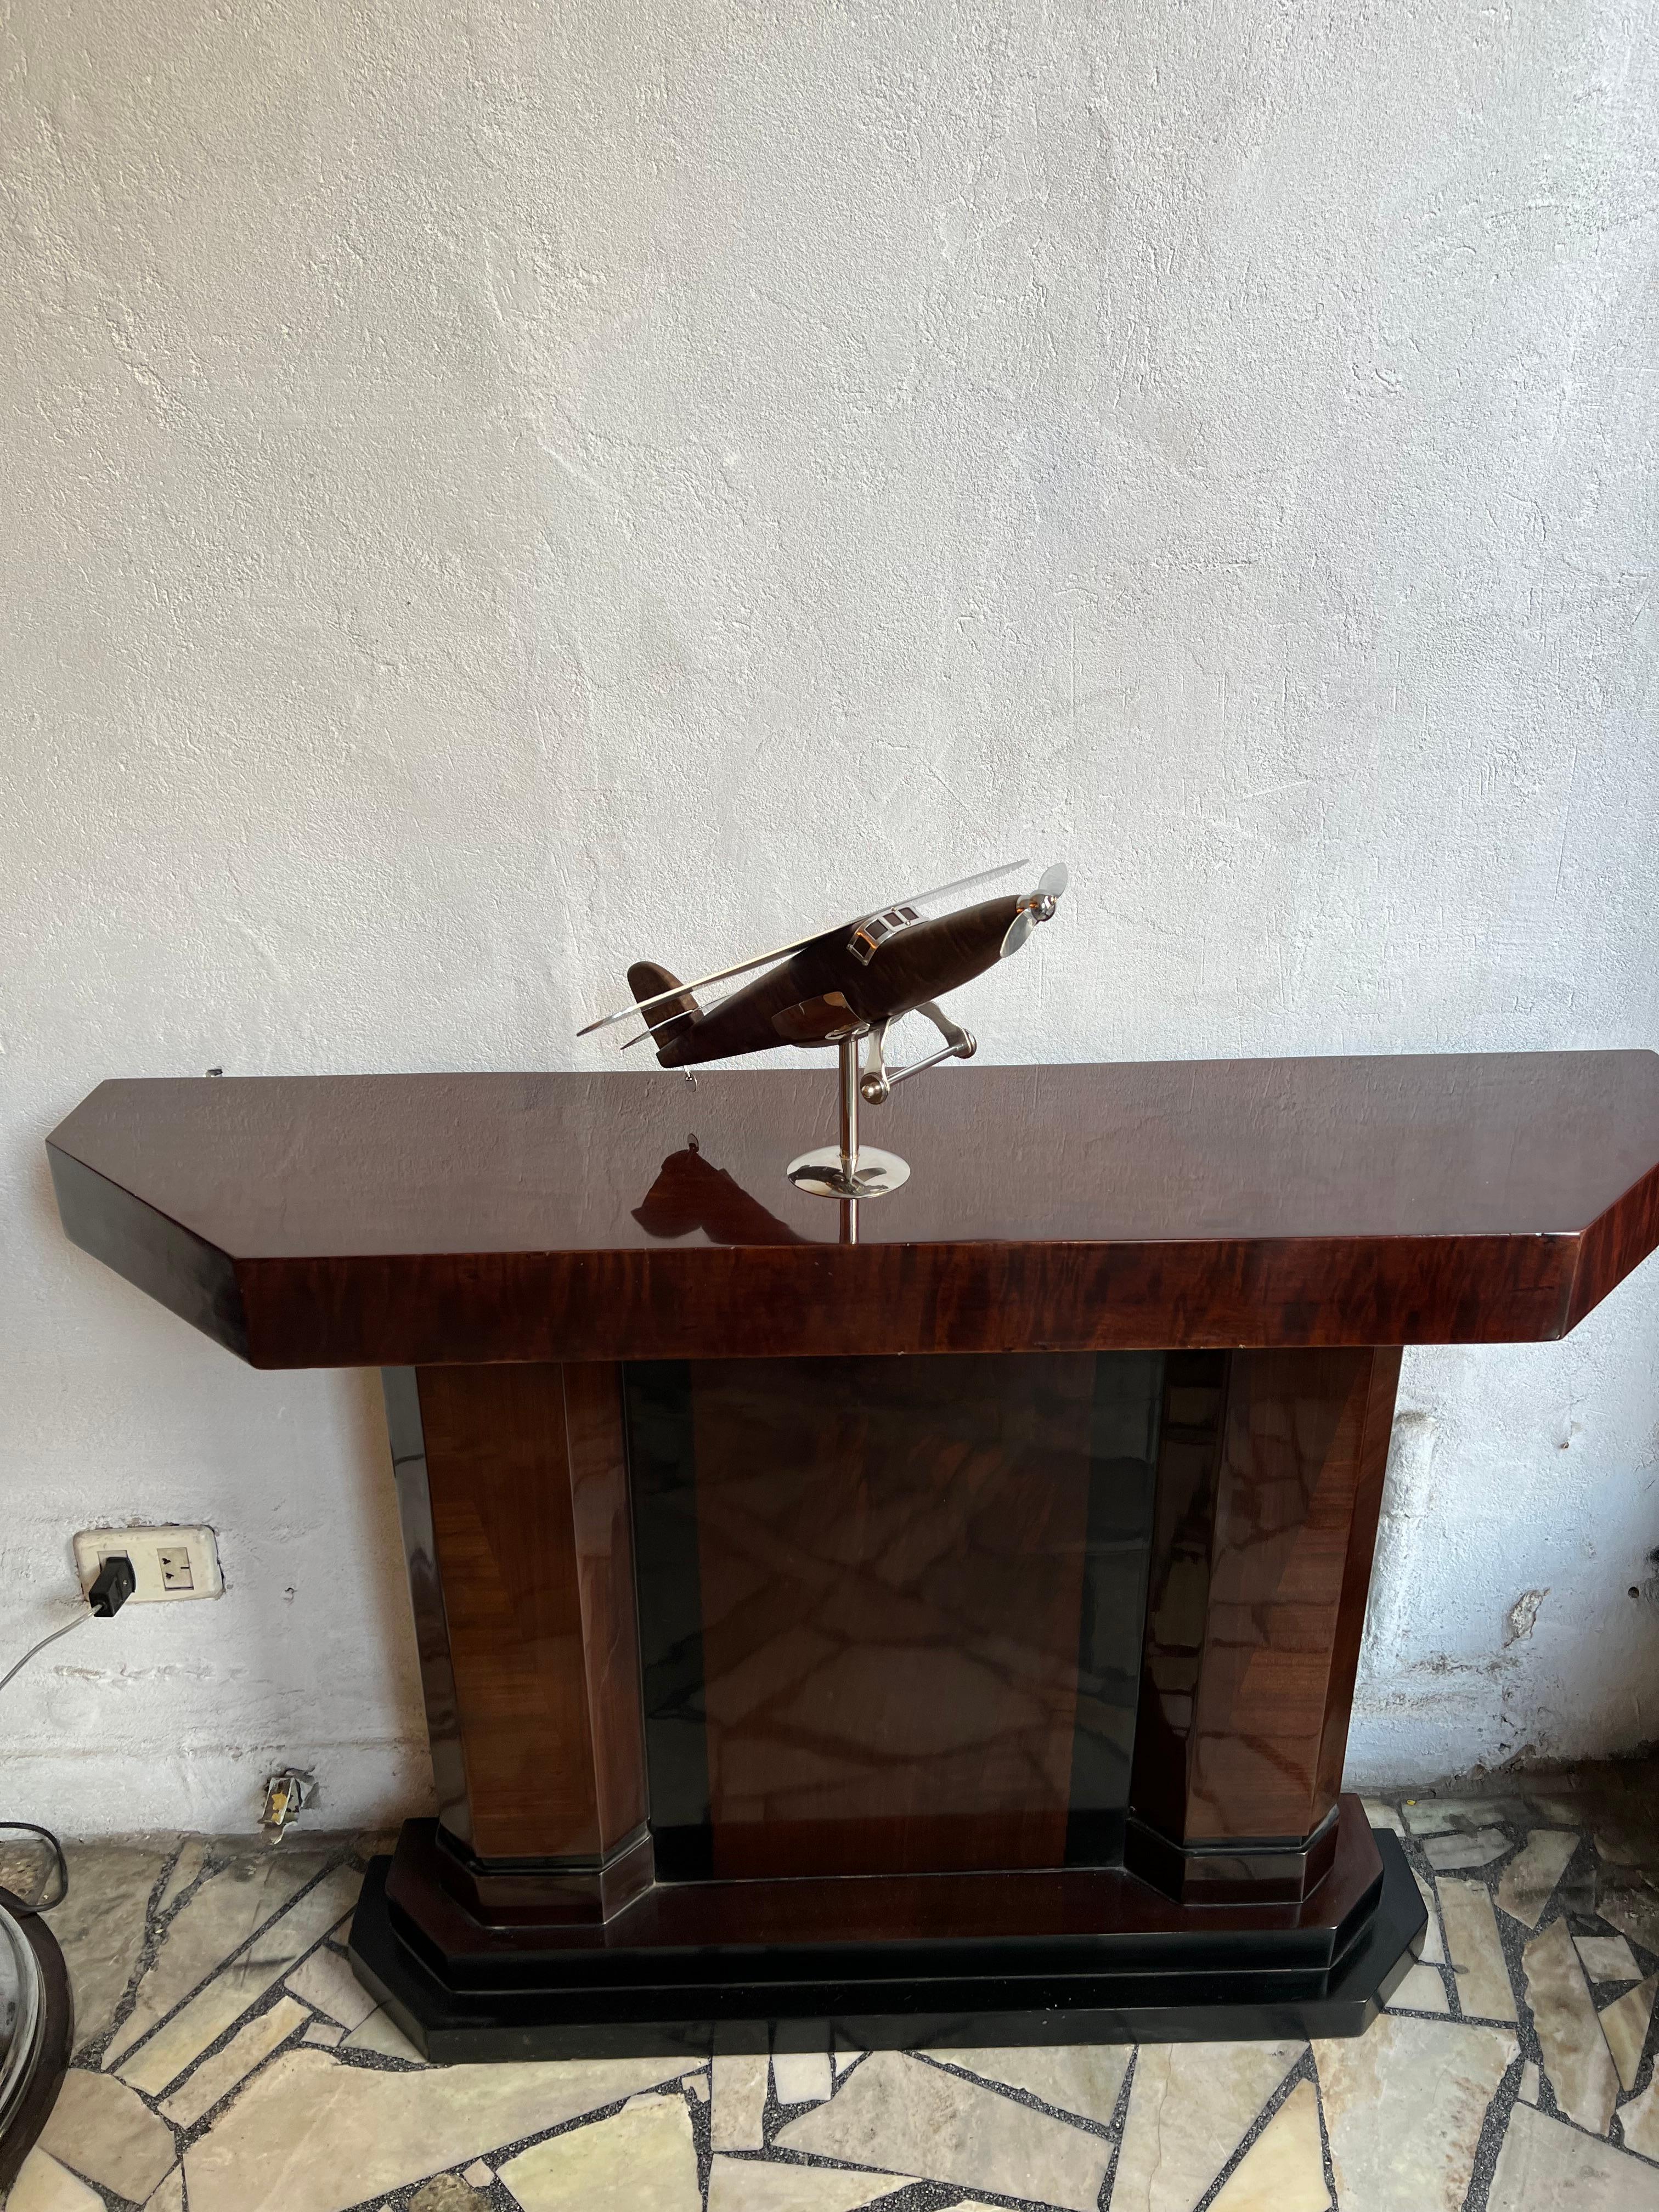 Art Deco Inspired Airplane in Wood Designer: Marcelo Peña, 2012 In Excellent Condition For Sale In Ciudad Autónoma Buenos Aires, C